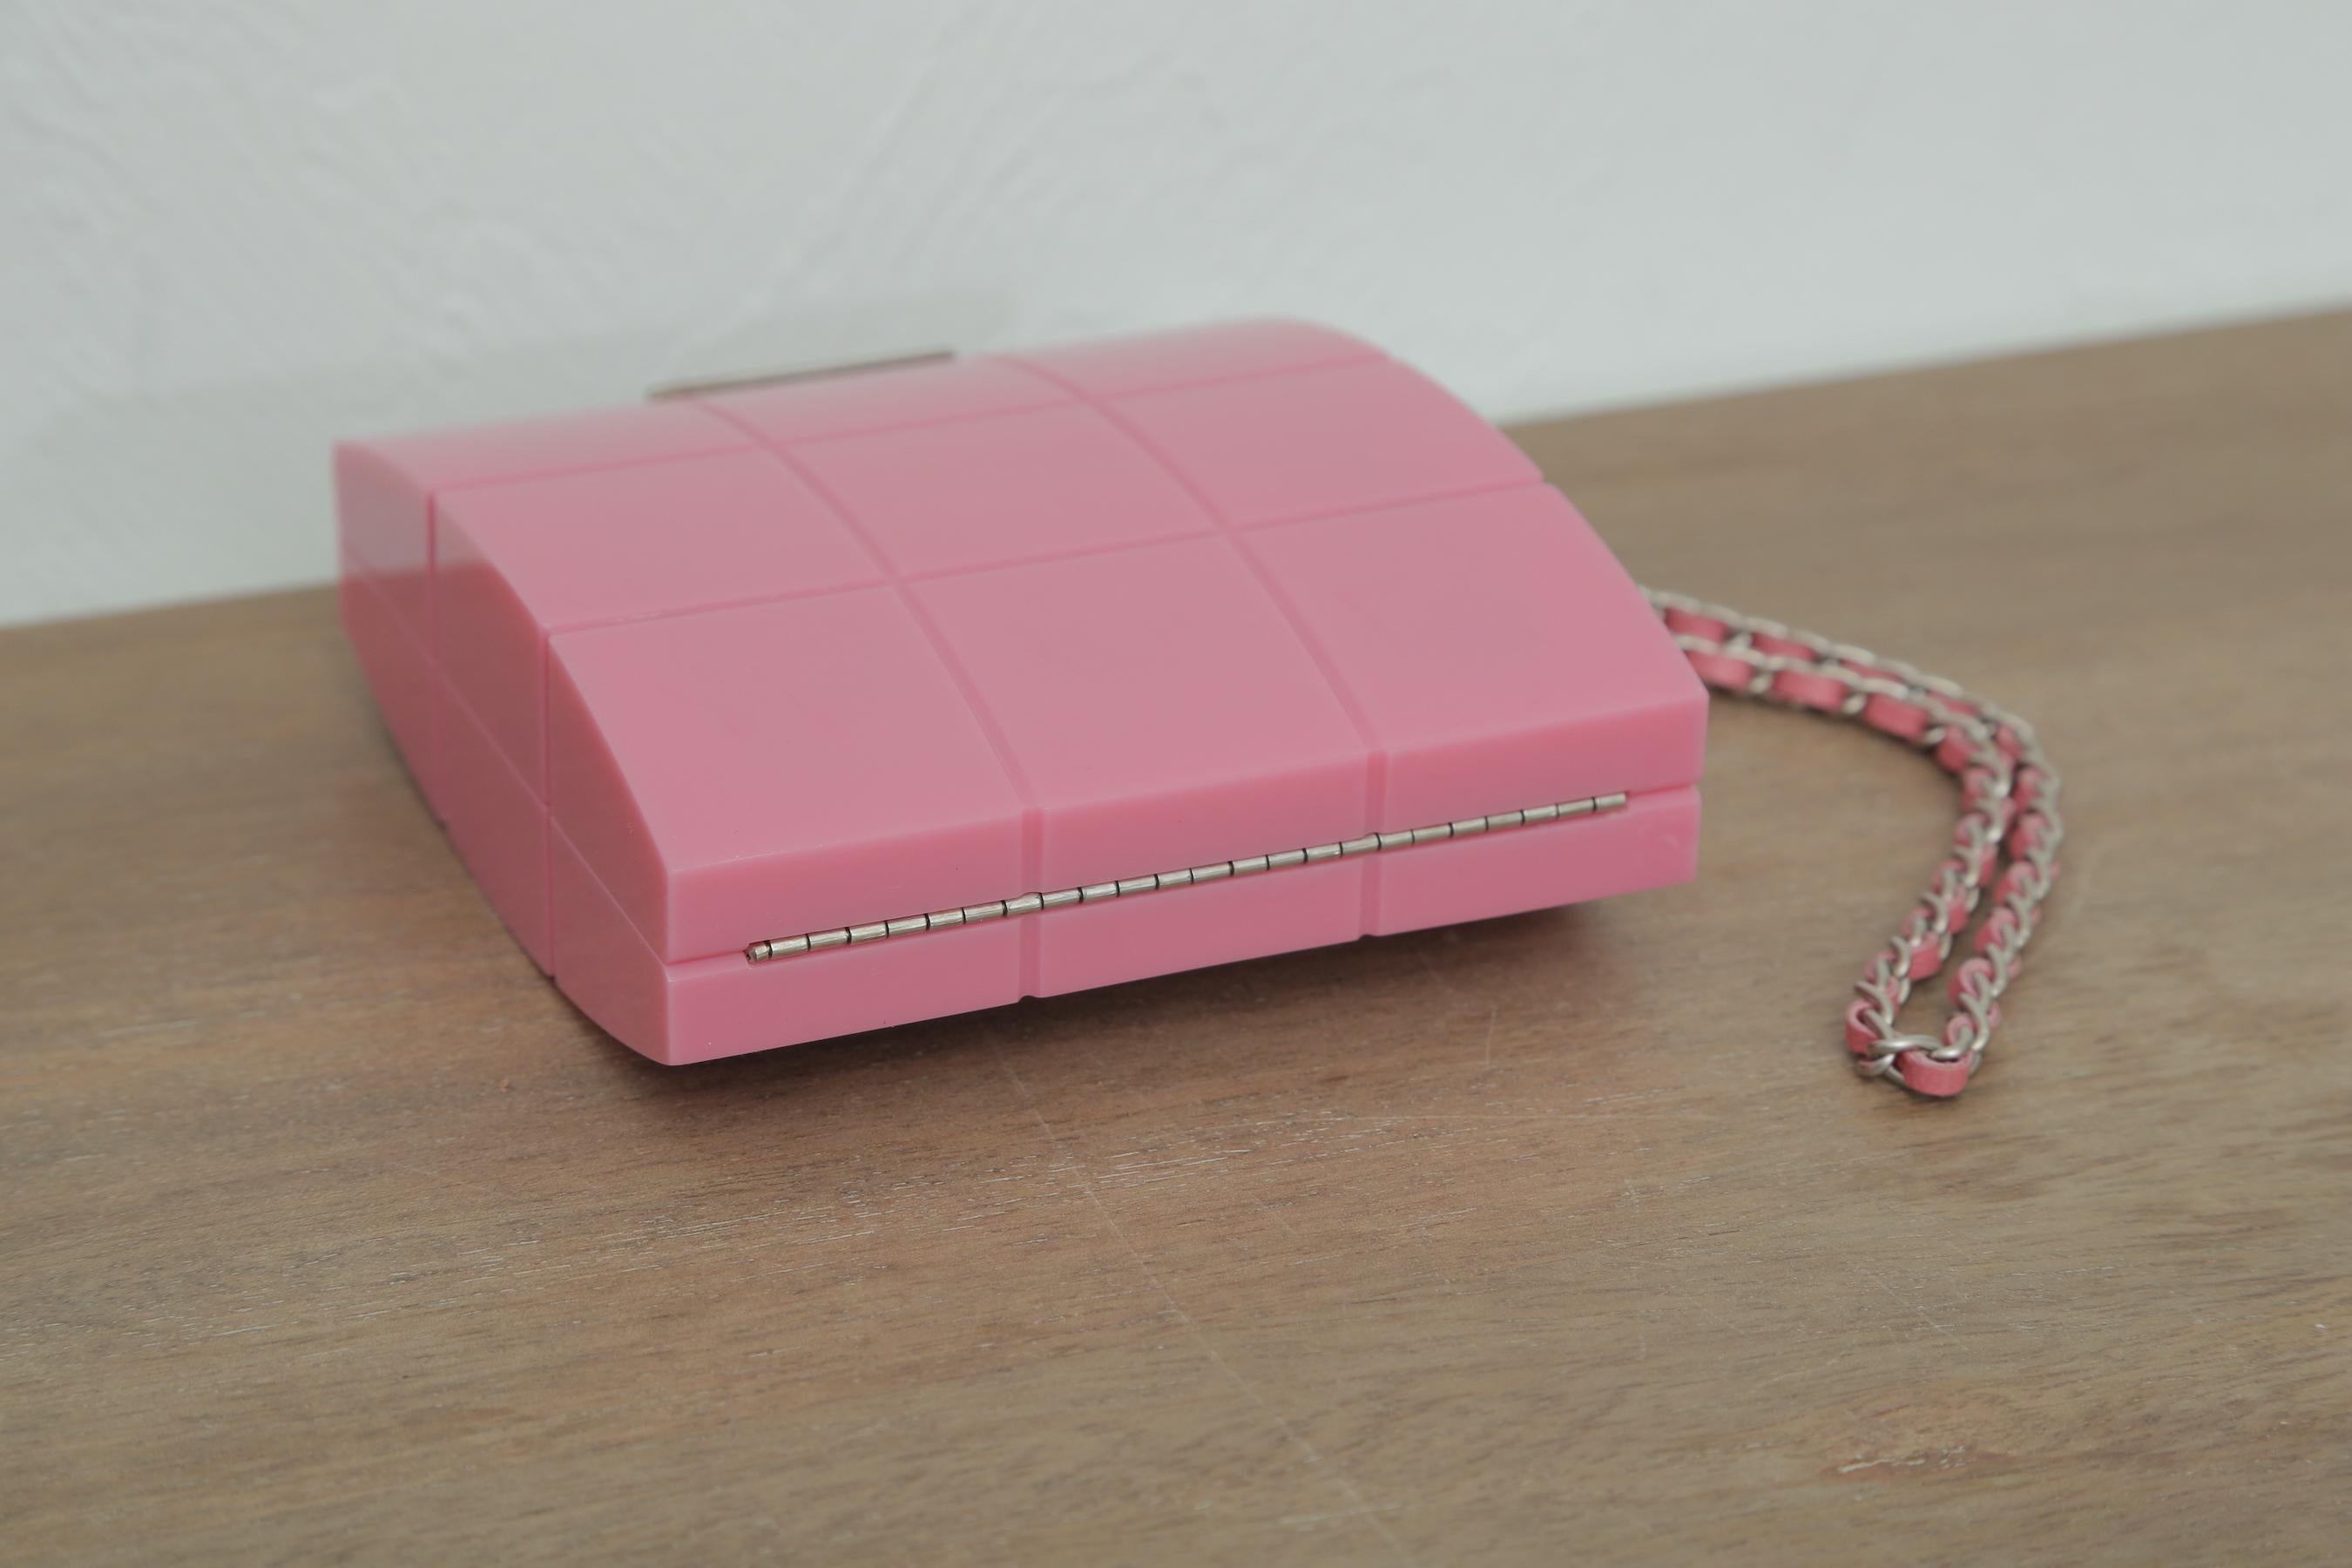  2002s Rare Chanel Perspex Lucite Minaudiere Pink Plastic Clutch For Sale 3